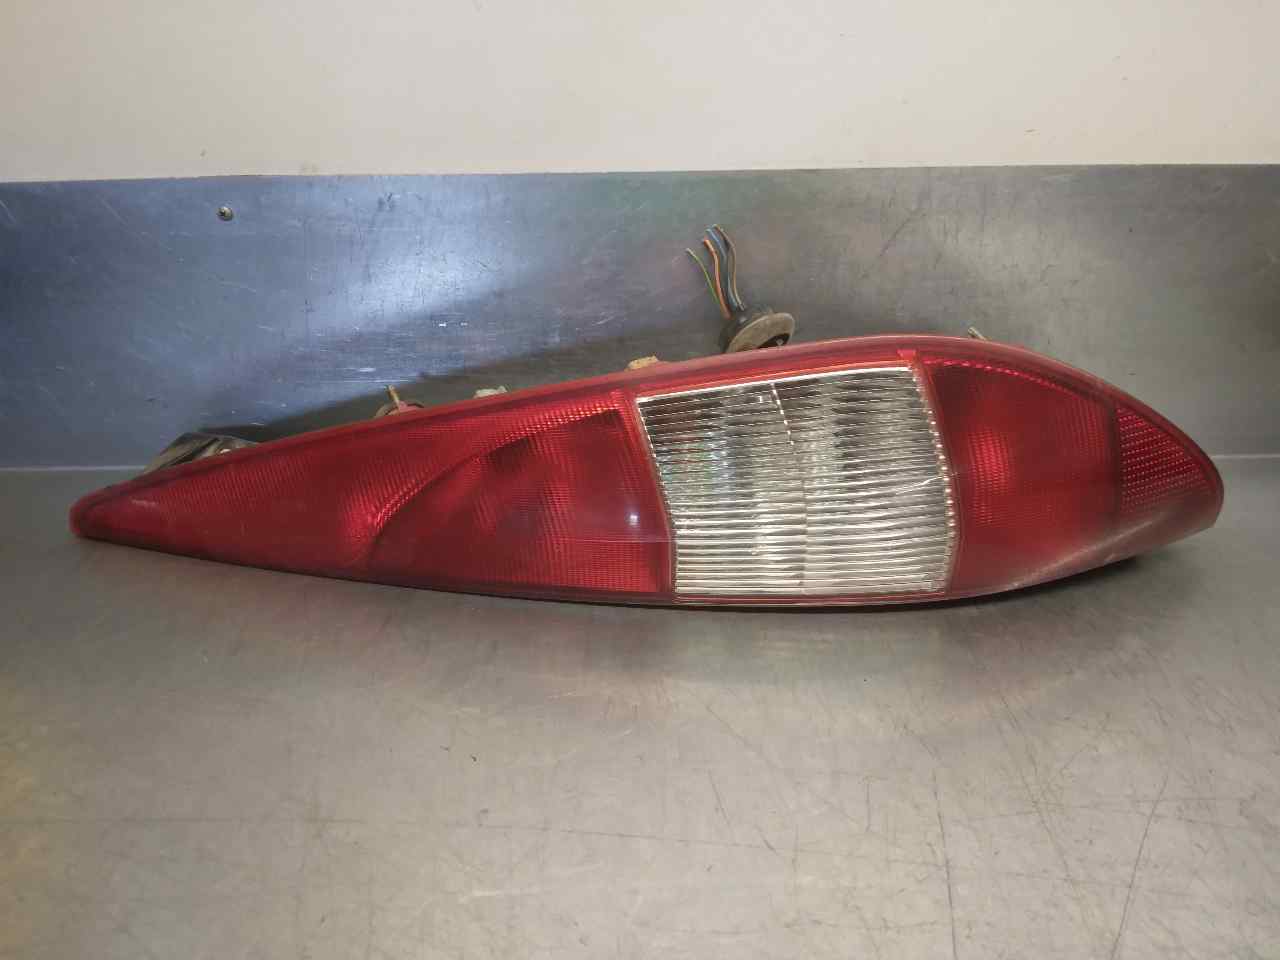 FORD Mondeo 3 generation (2000-2007) Rear Right Taillight Lamp 1S7113404C, 5PUERTAS 19828858